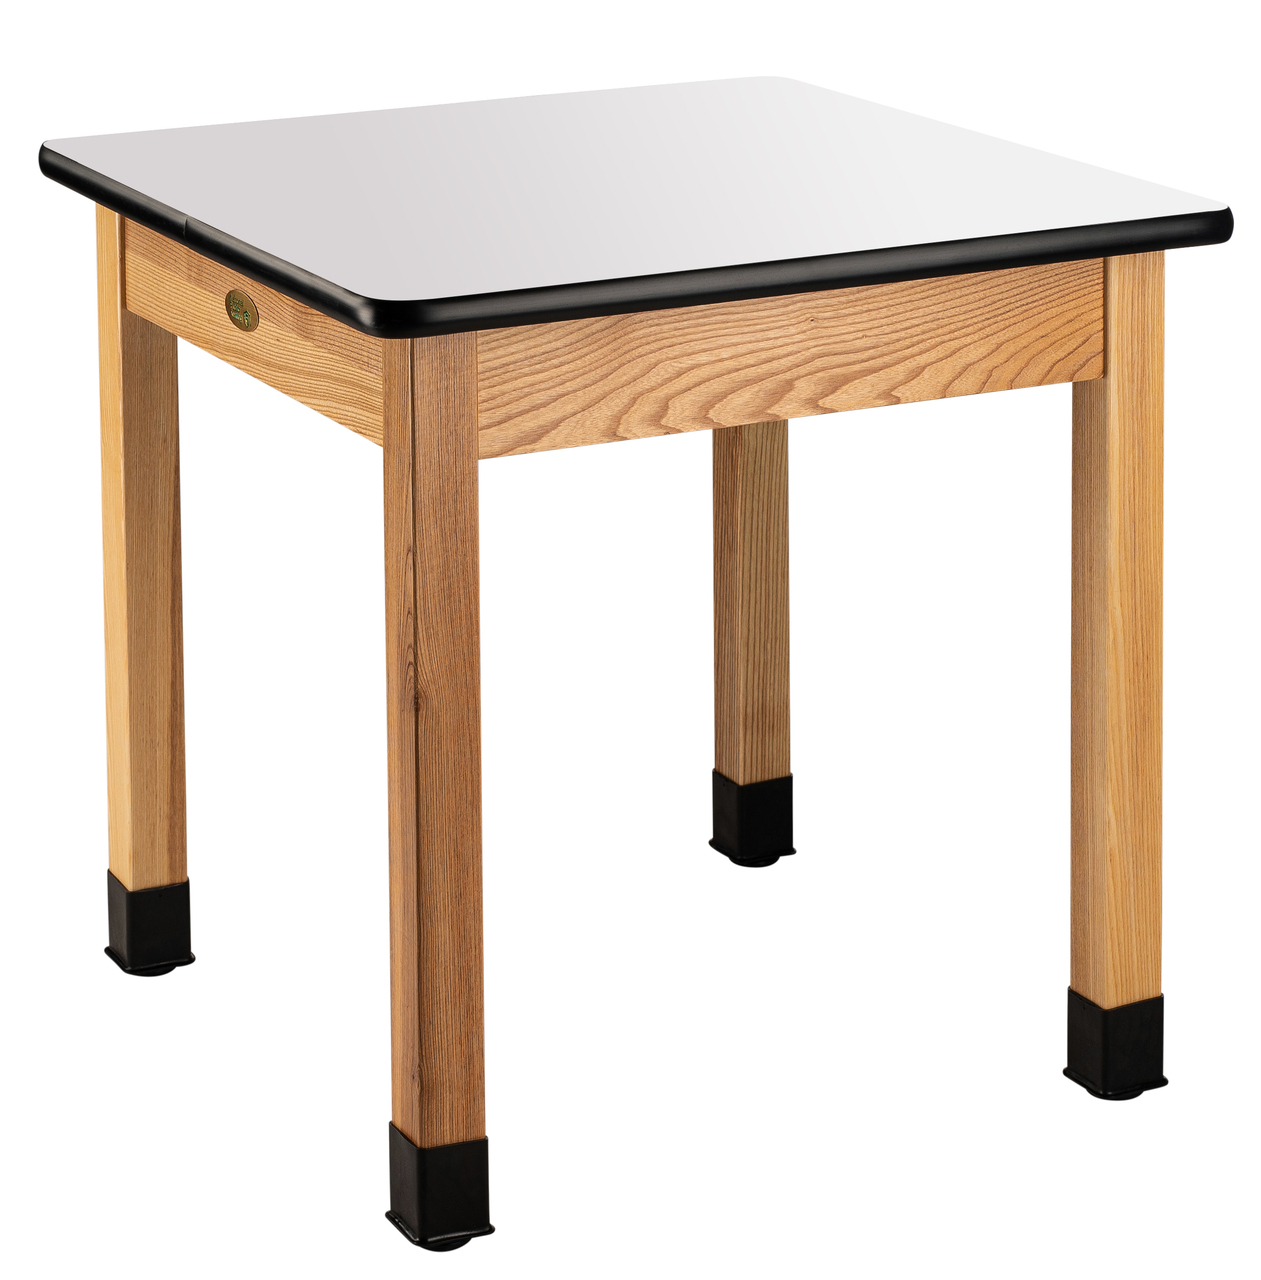 NPS Wood Science Lab Table, 30"x30"x30", Whiteboard Top - Black Top and Ash Leg